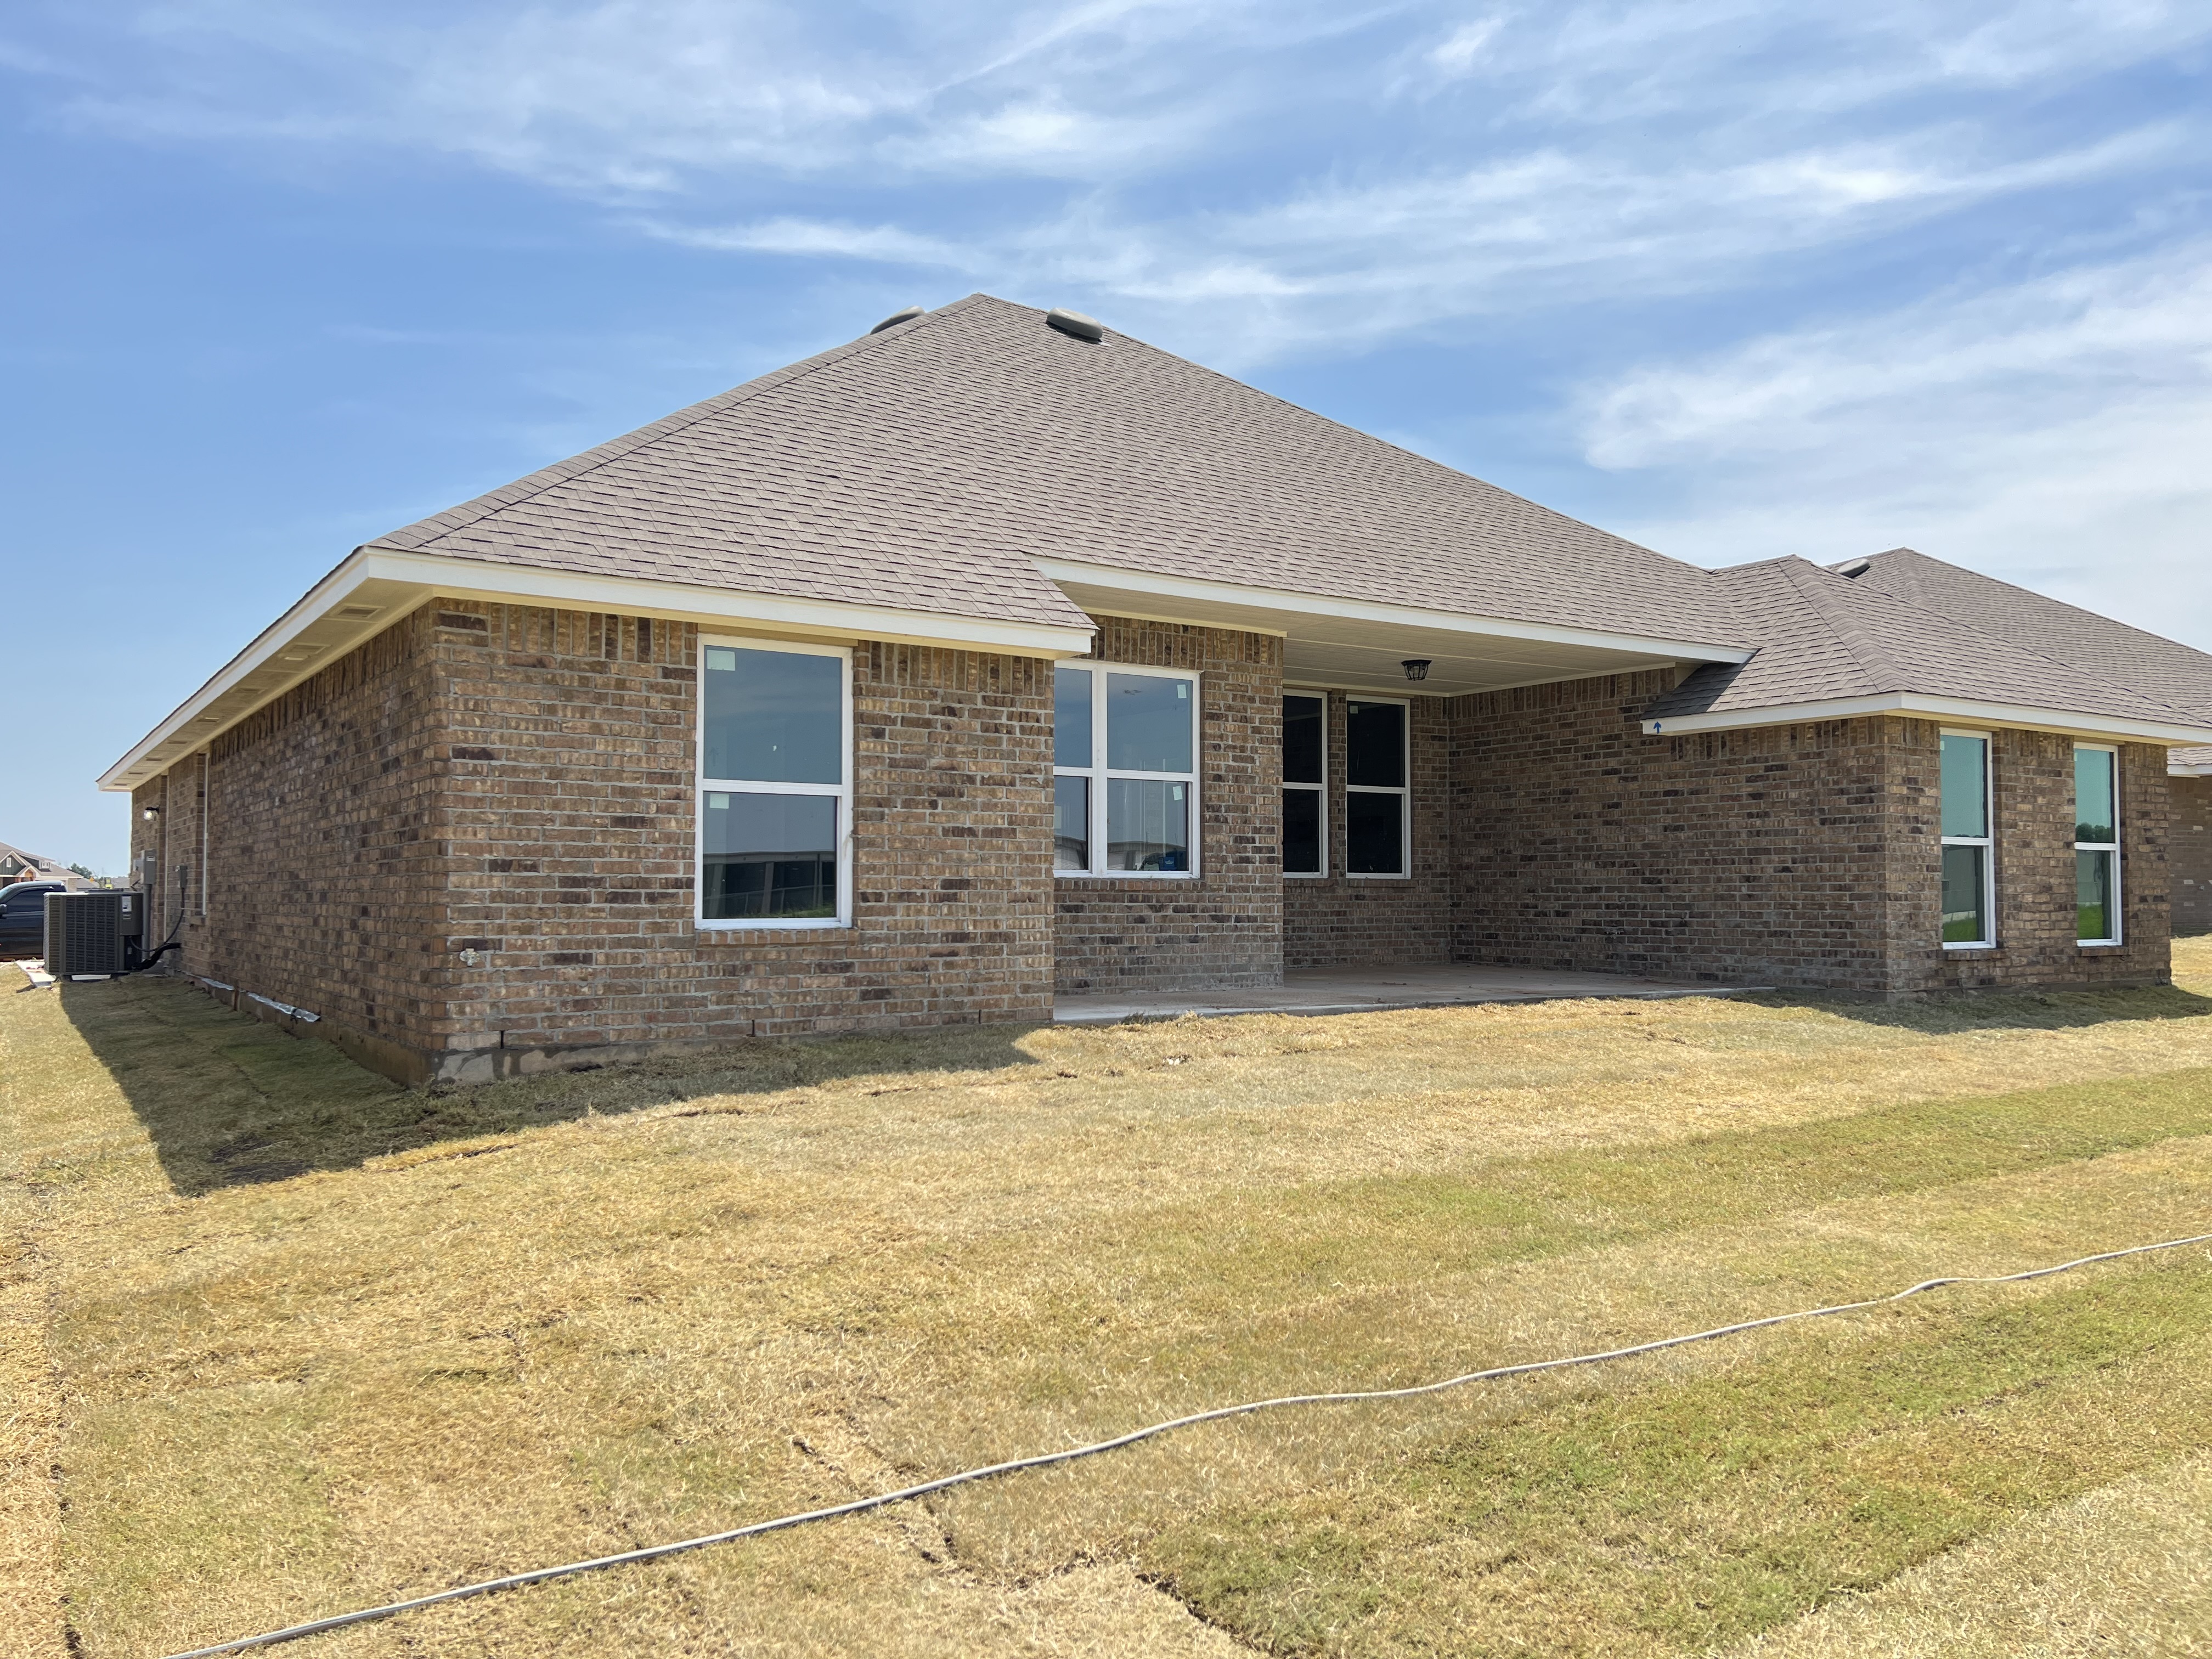 1189 NW 12th Street, Newcastle, Oklahoma 73065, 4 Bedrooms Bedrooms, ,2 BathroomsBathrooms,House,For Sale,NW 12th Street,1391